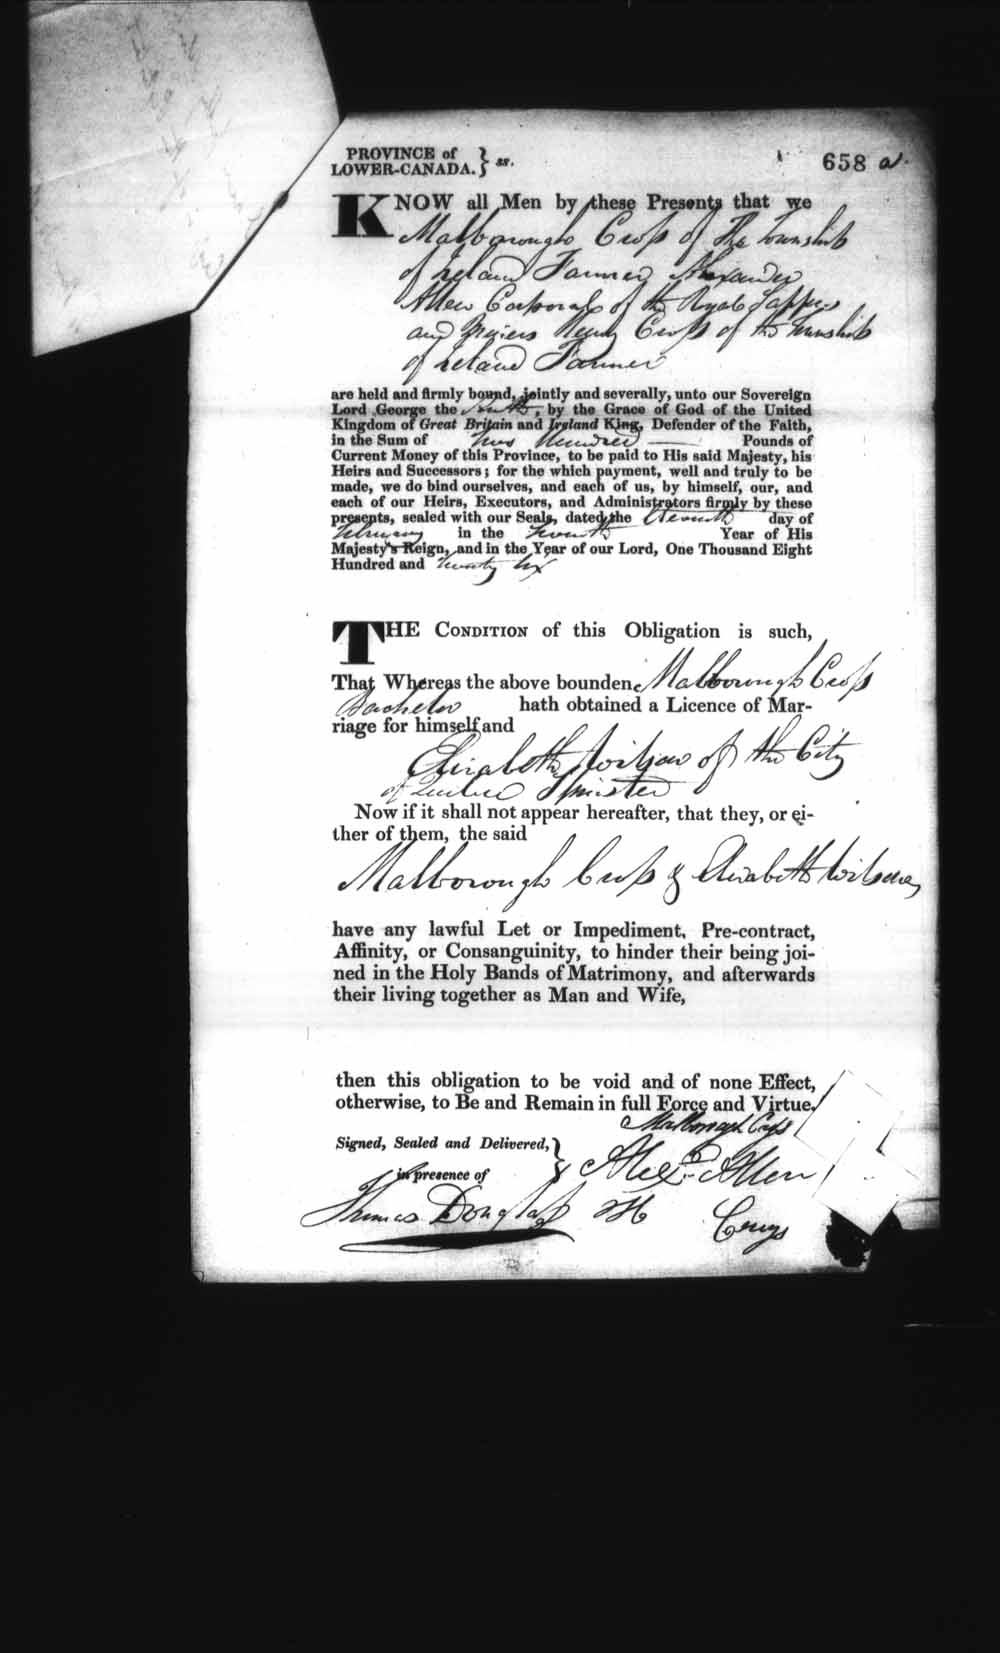 Digitized page of Upper and Lower Canada Marriage Bonds (1779-1865) for Image No.: e008236693